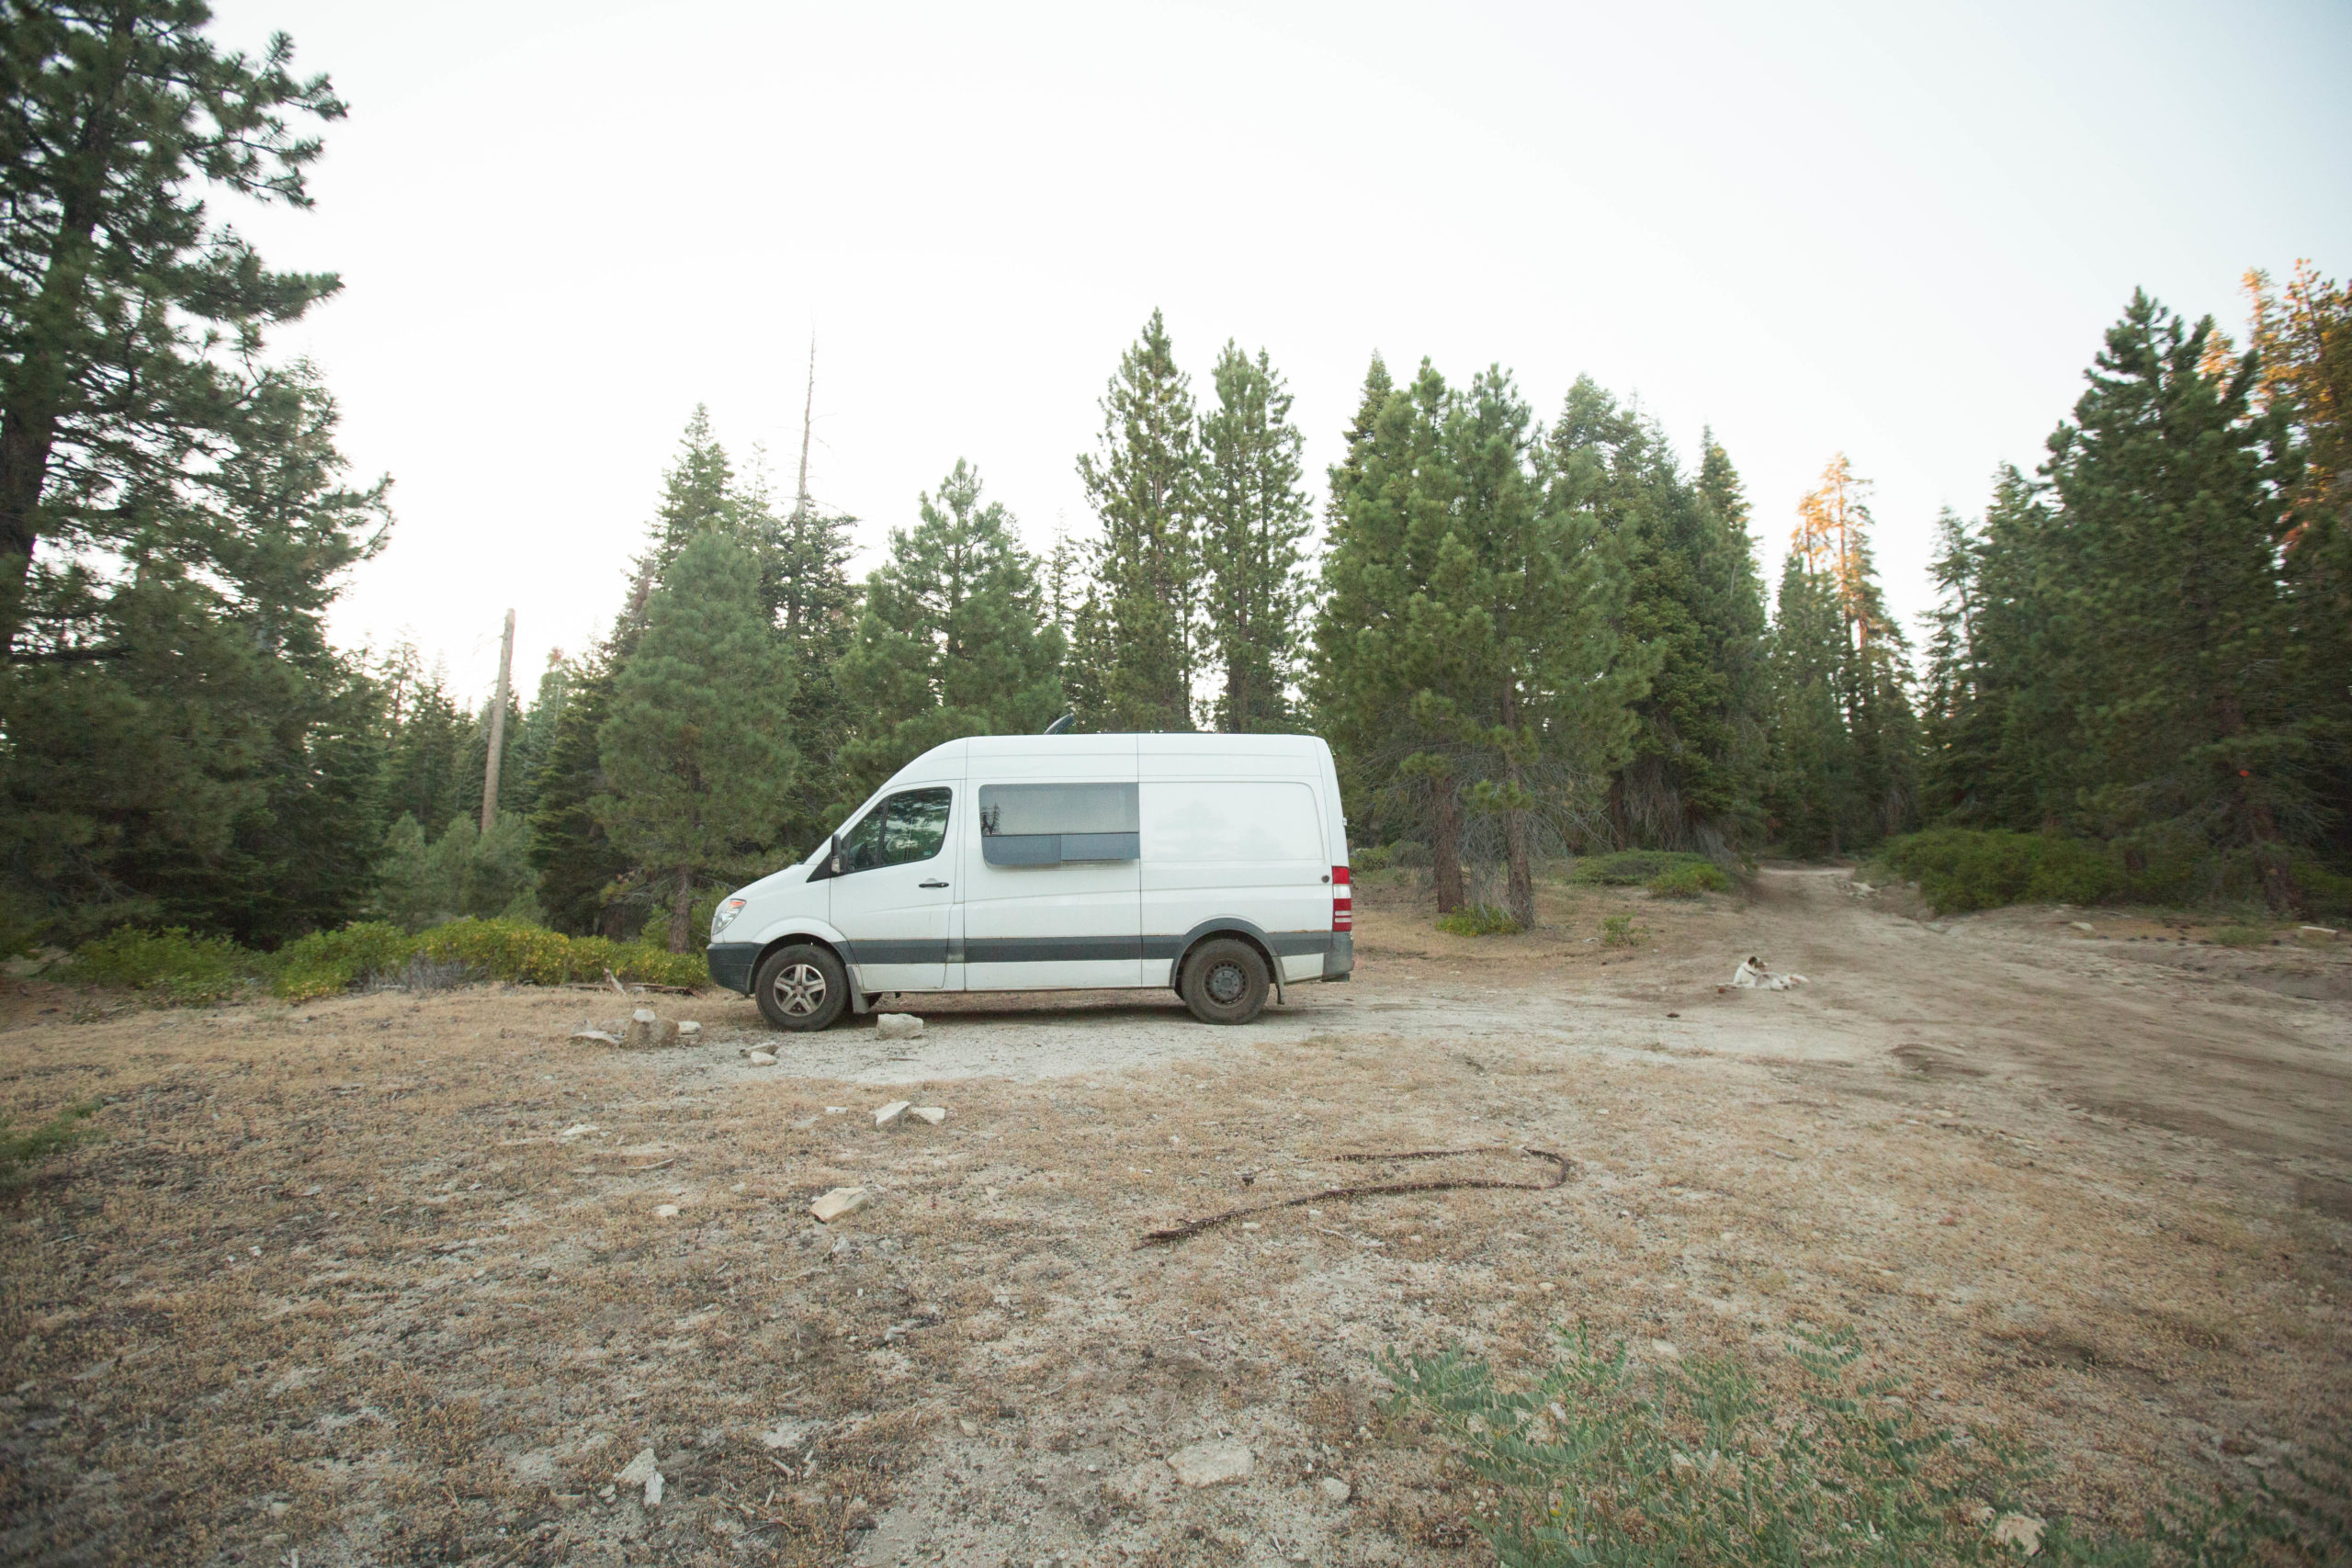 Secluded roads throughout Sequoia National Forest